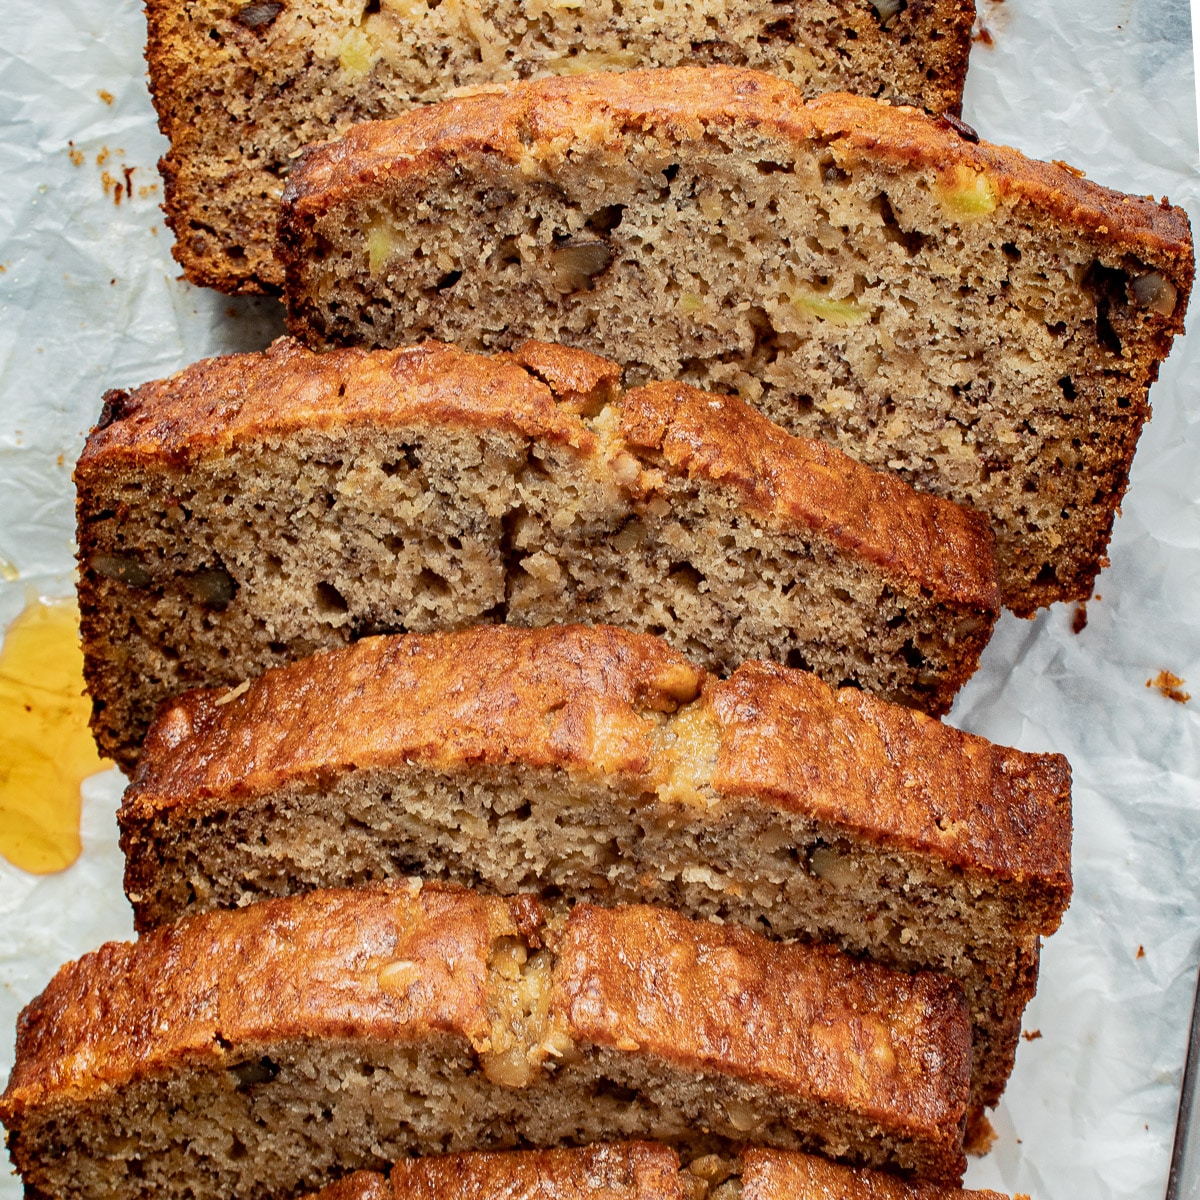 stacked pineapple banana bread seen from above